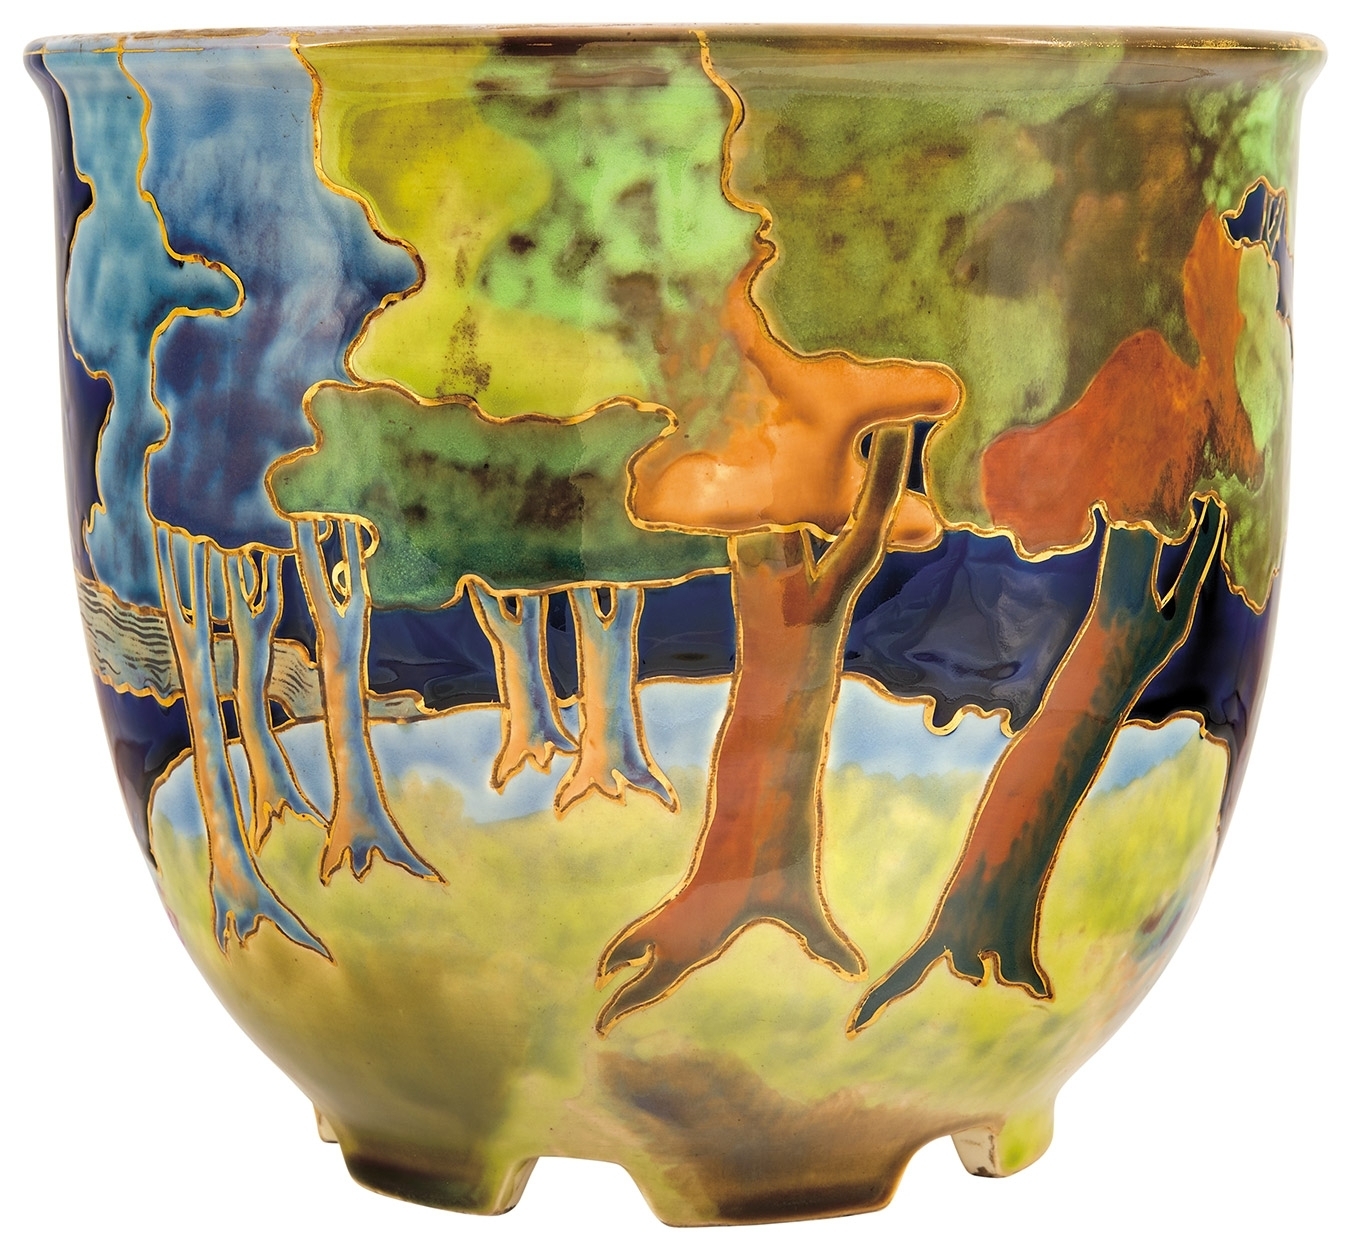 Zsolnay Giant Ceramic Plant Holder with Forest Panorama of the ”Venetian”-series Zsolnay, 1902